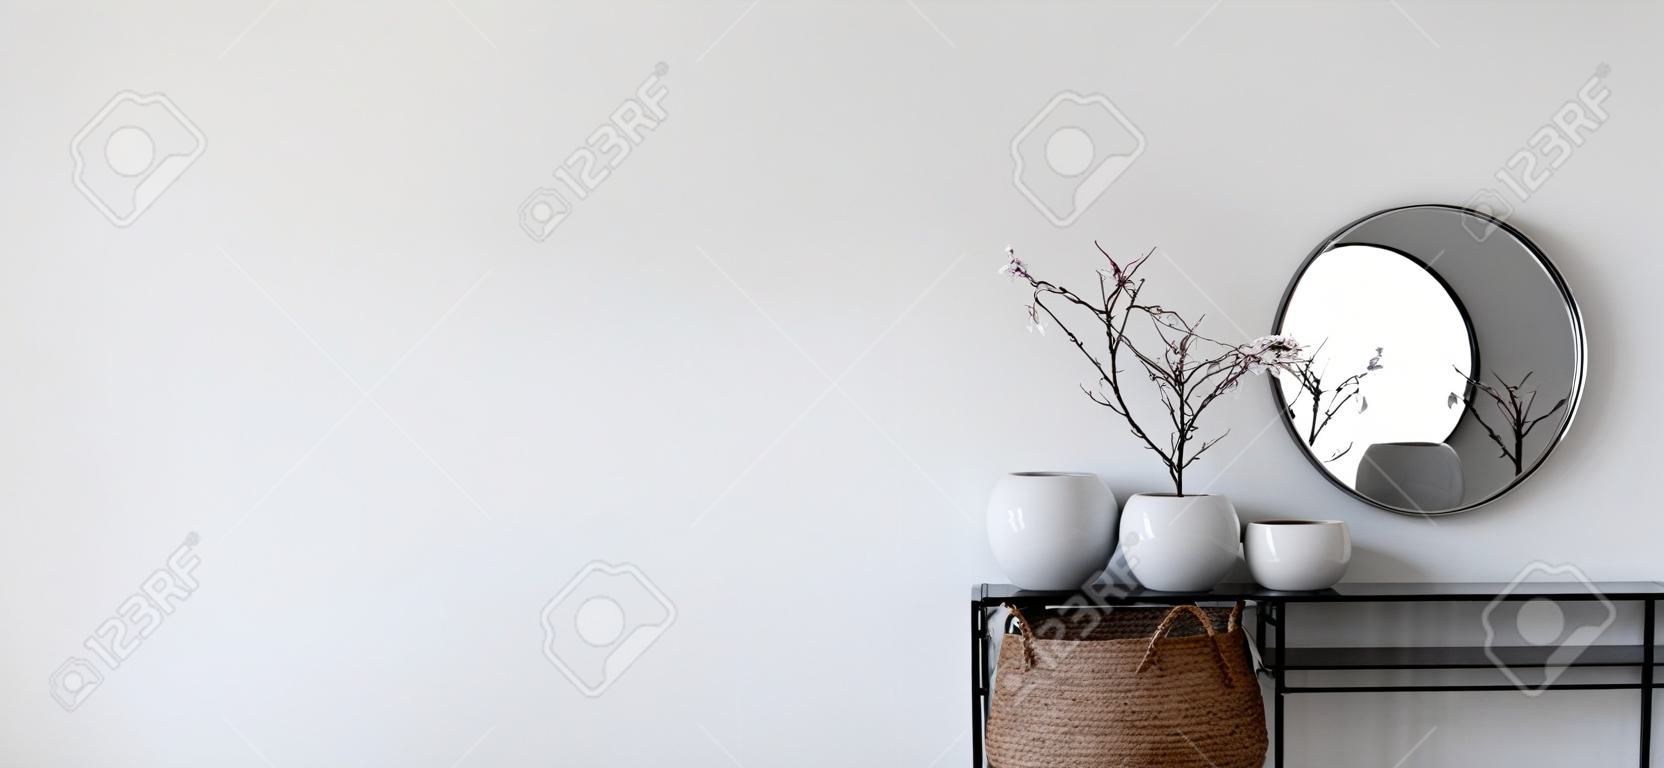 Single modern black display holding up mirror and potted plants in front of white wall. Includes copy space. 3d rendering